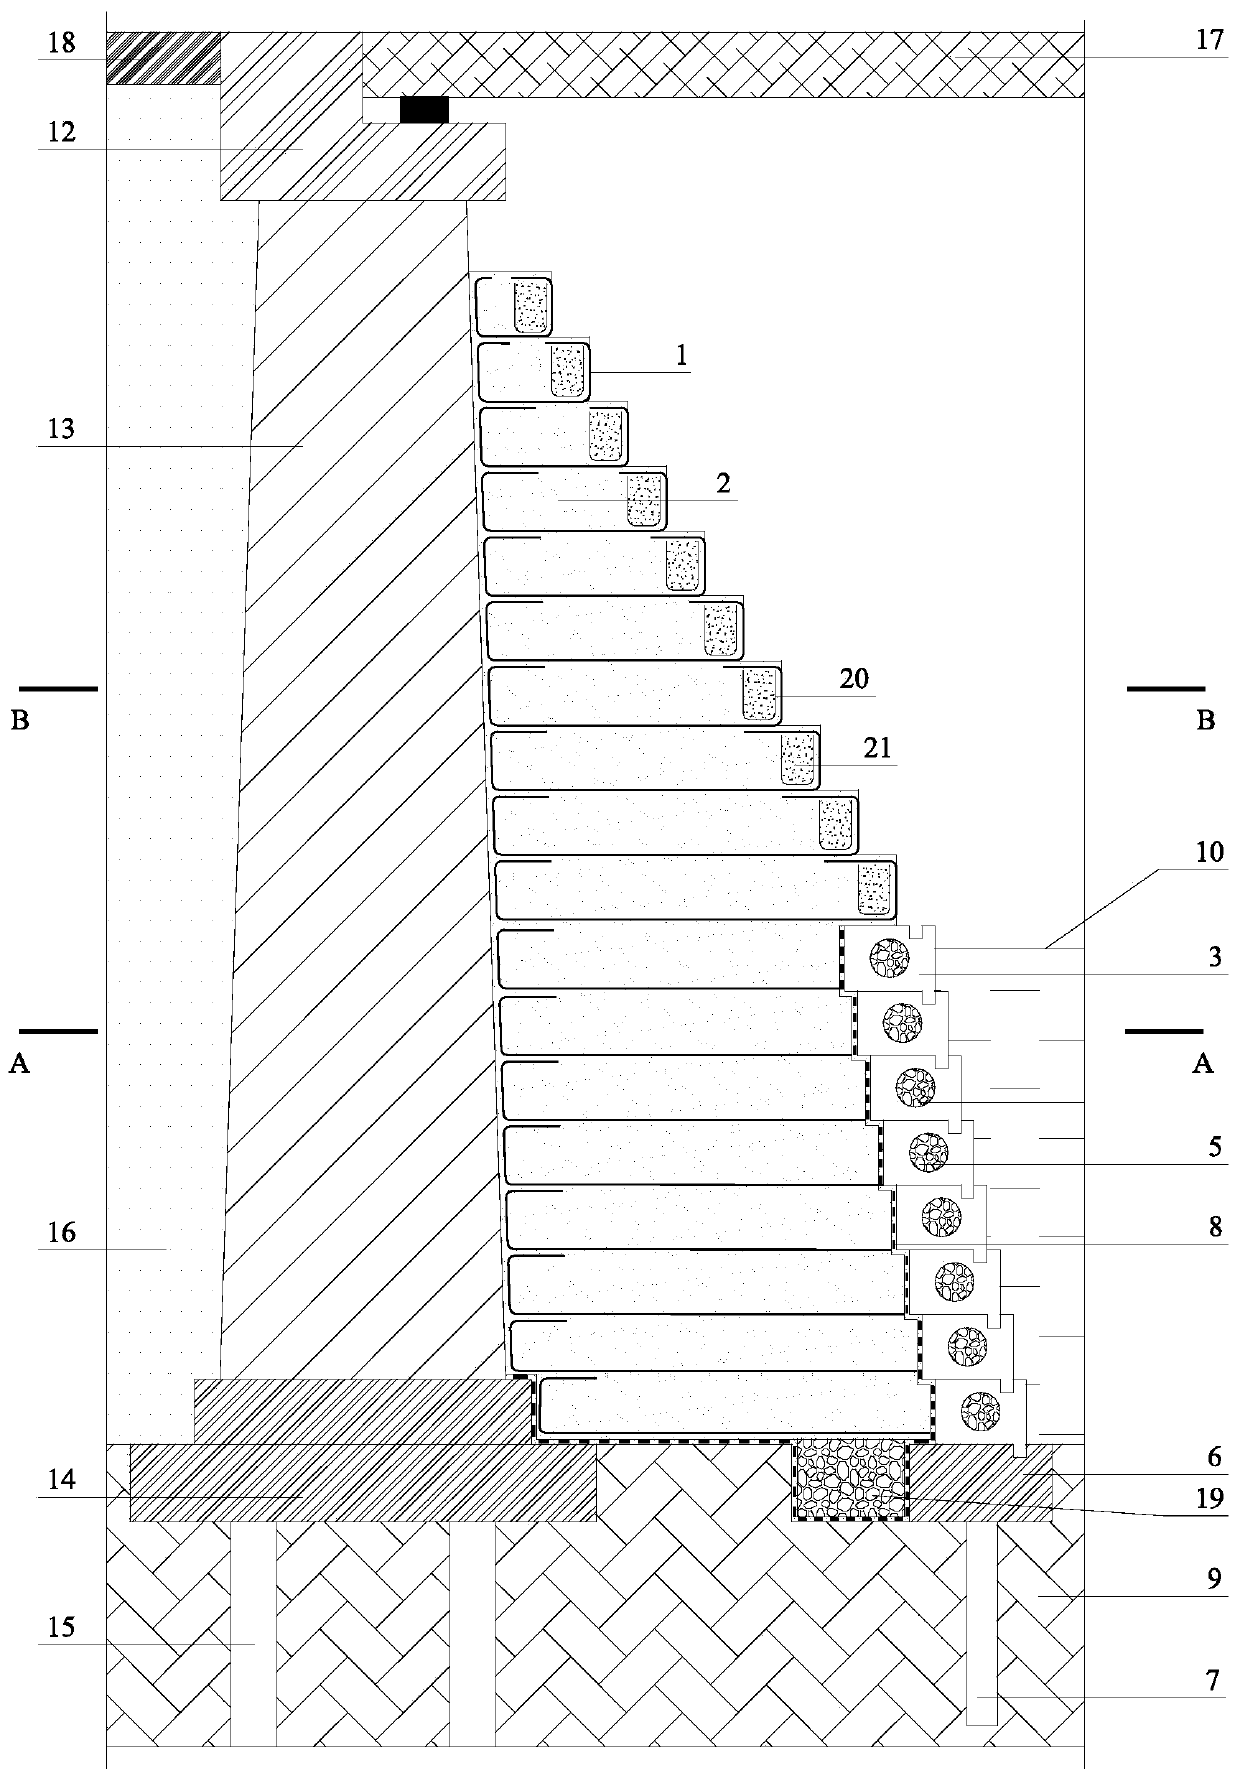 Ecological protection construction method of stepped 3D stiffened bridge abutment conical slope